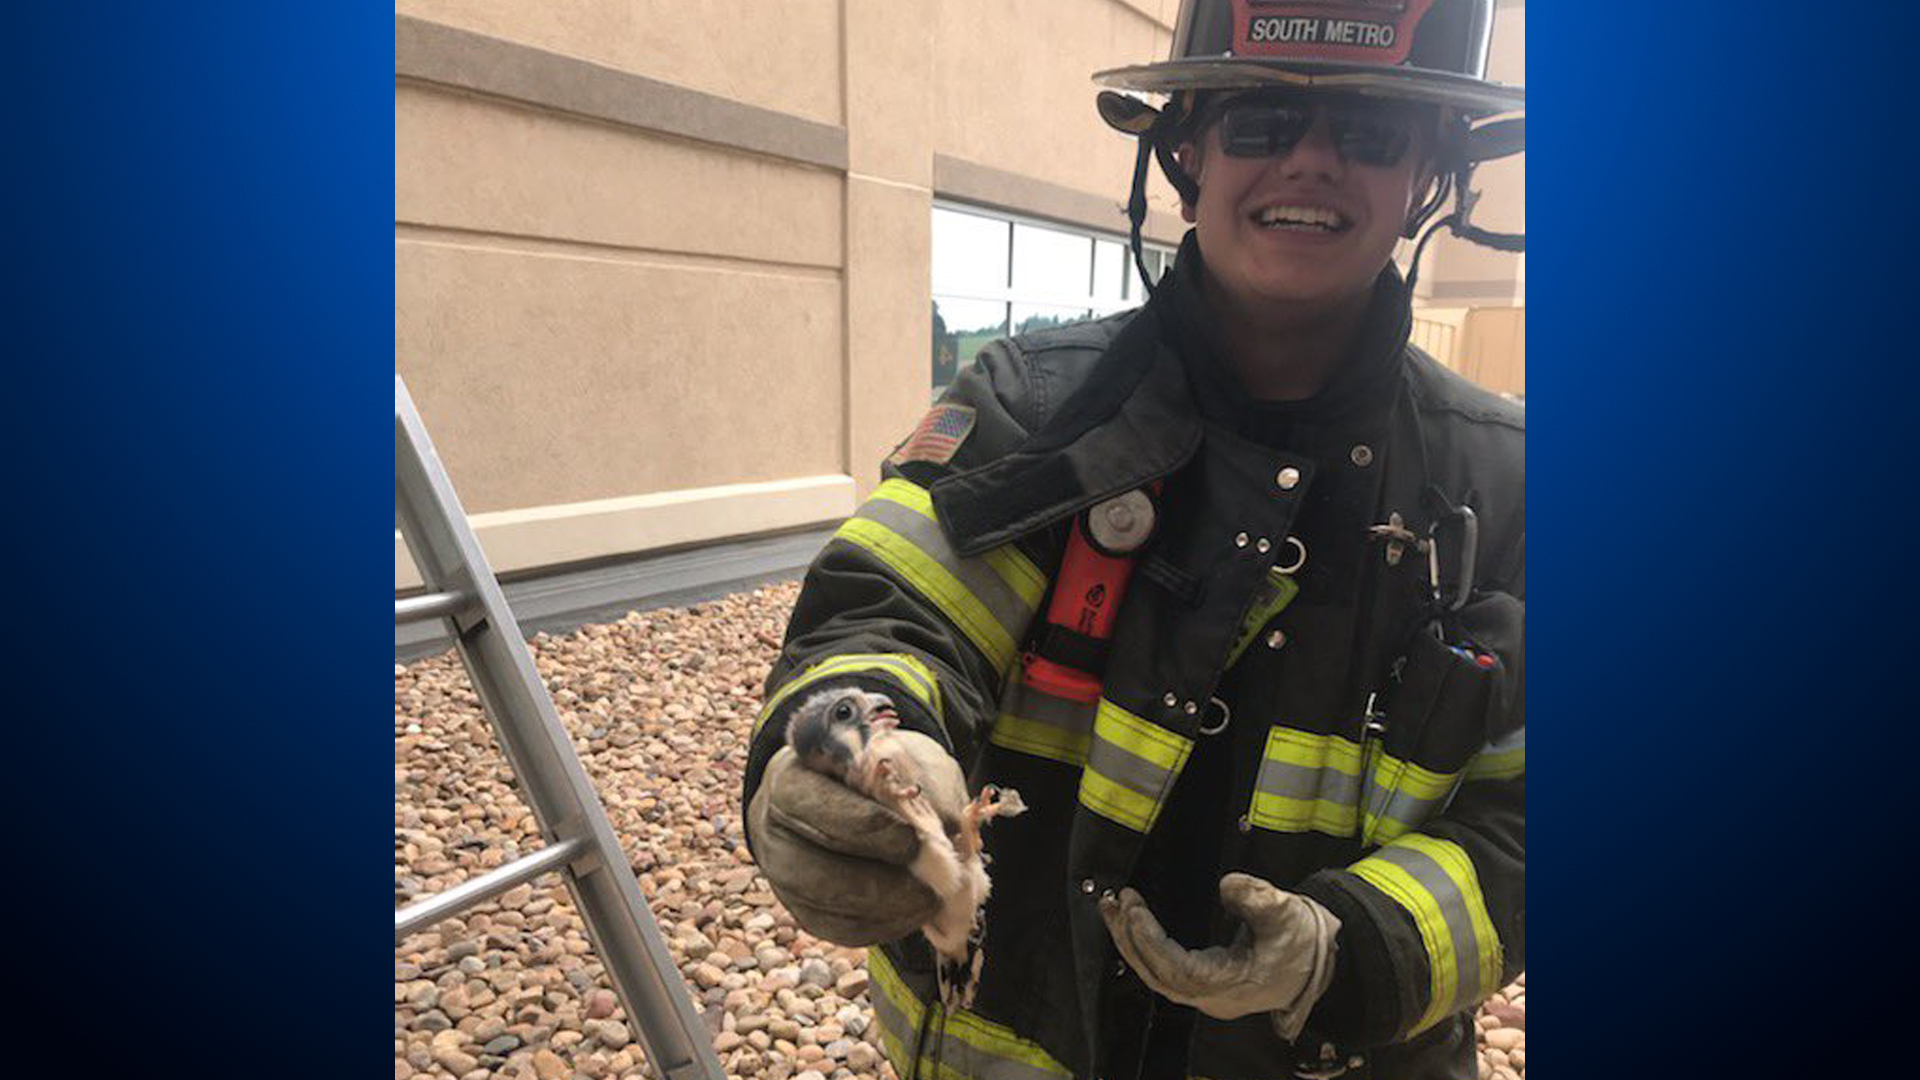 South Metro Firefighter Rescues Fawn, Baby Falcon And Cat In One Day – CBS Denver